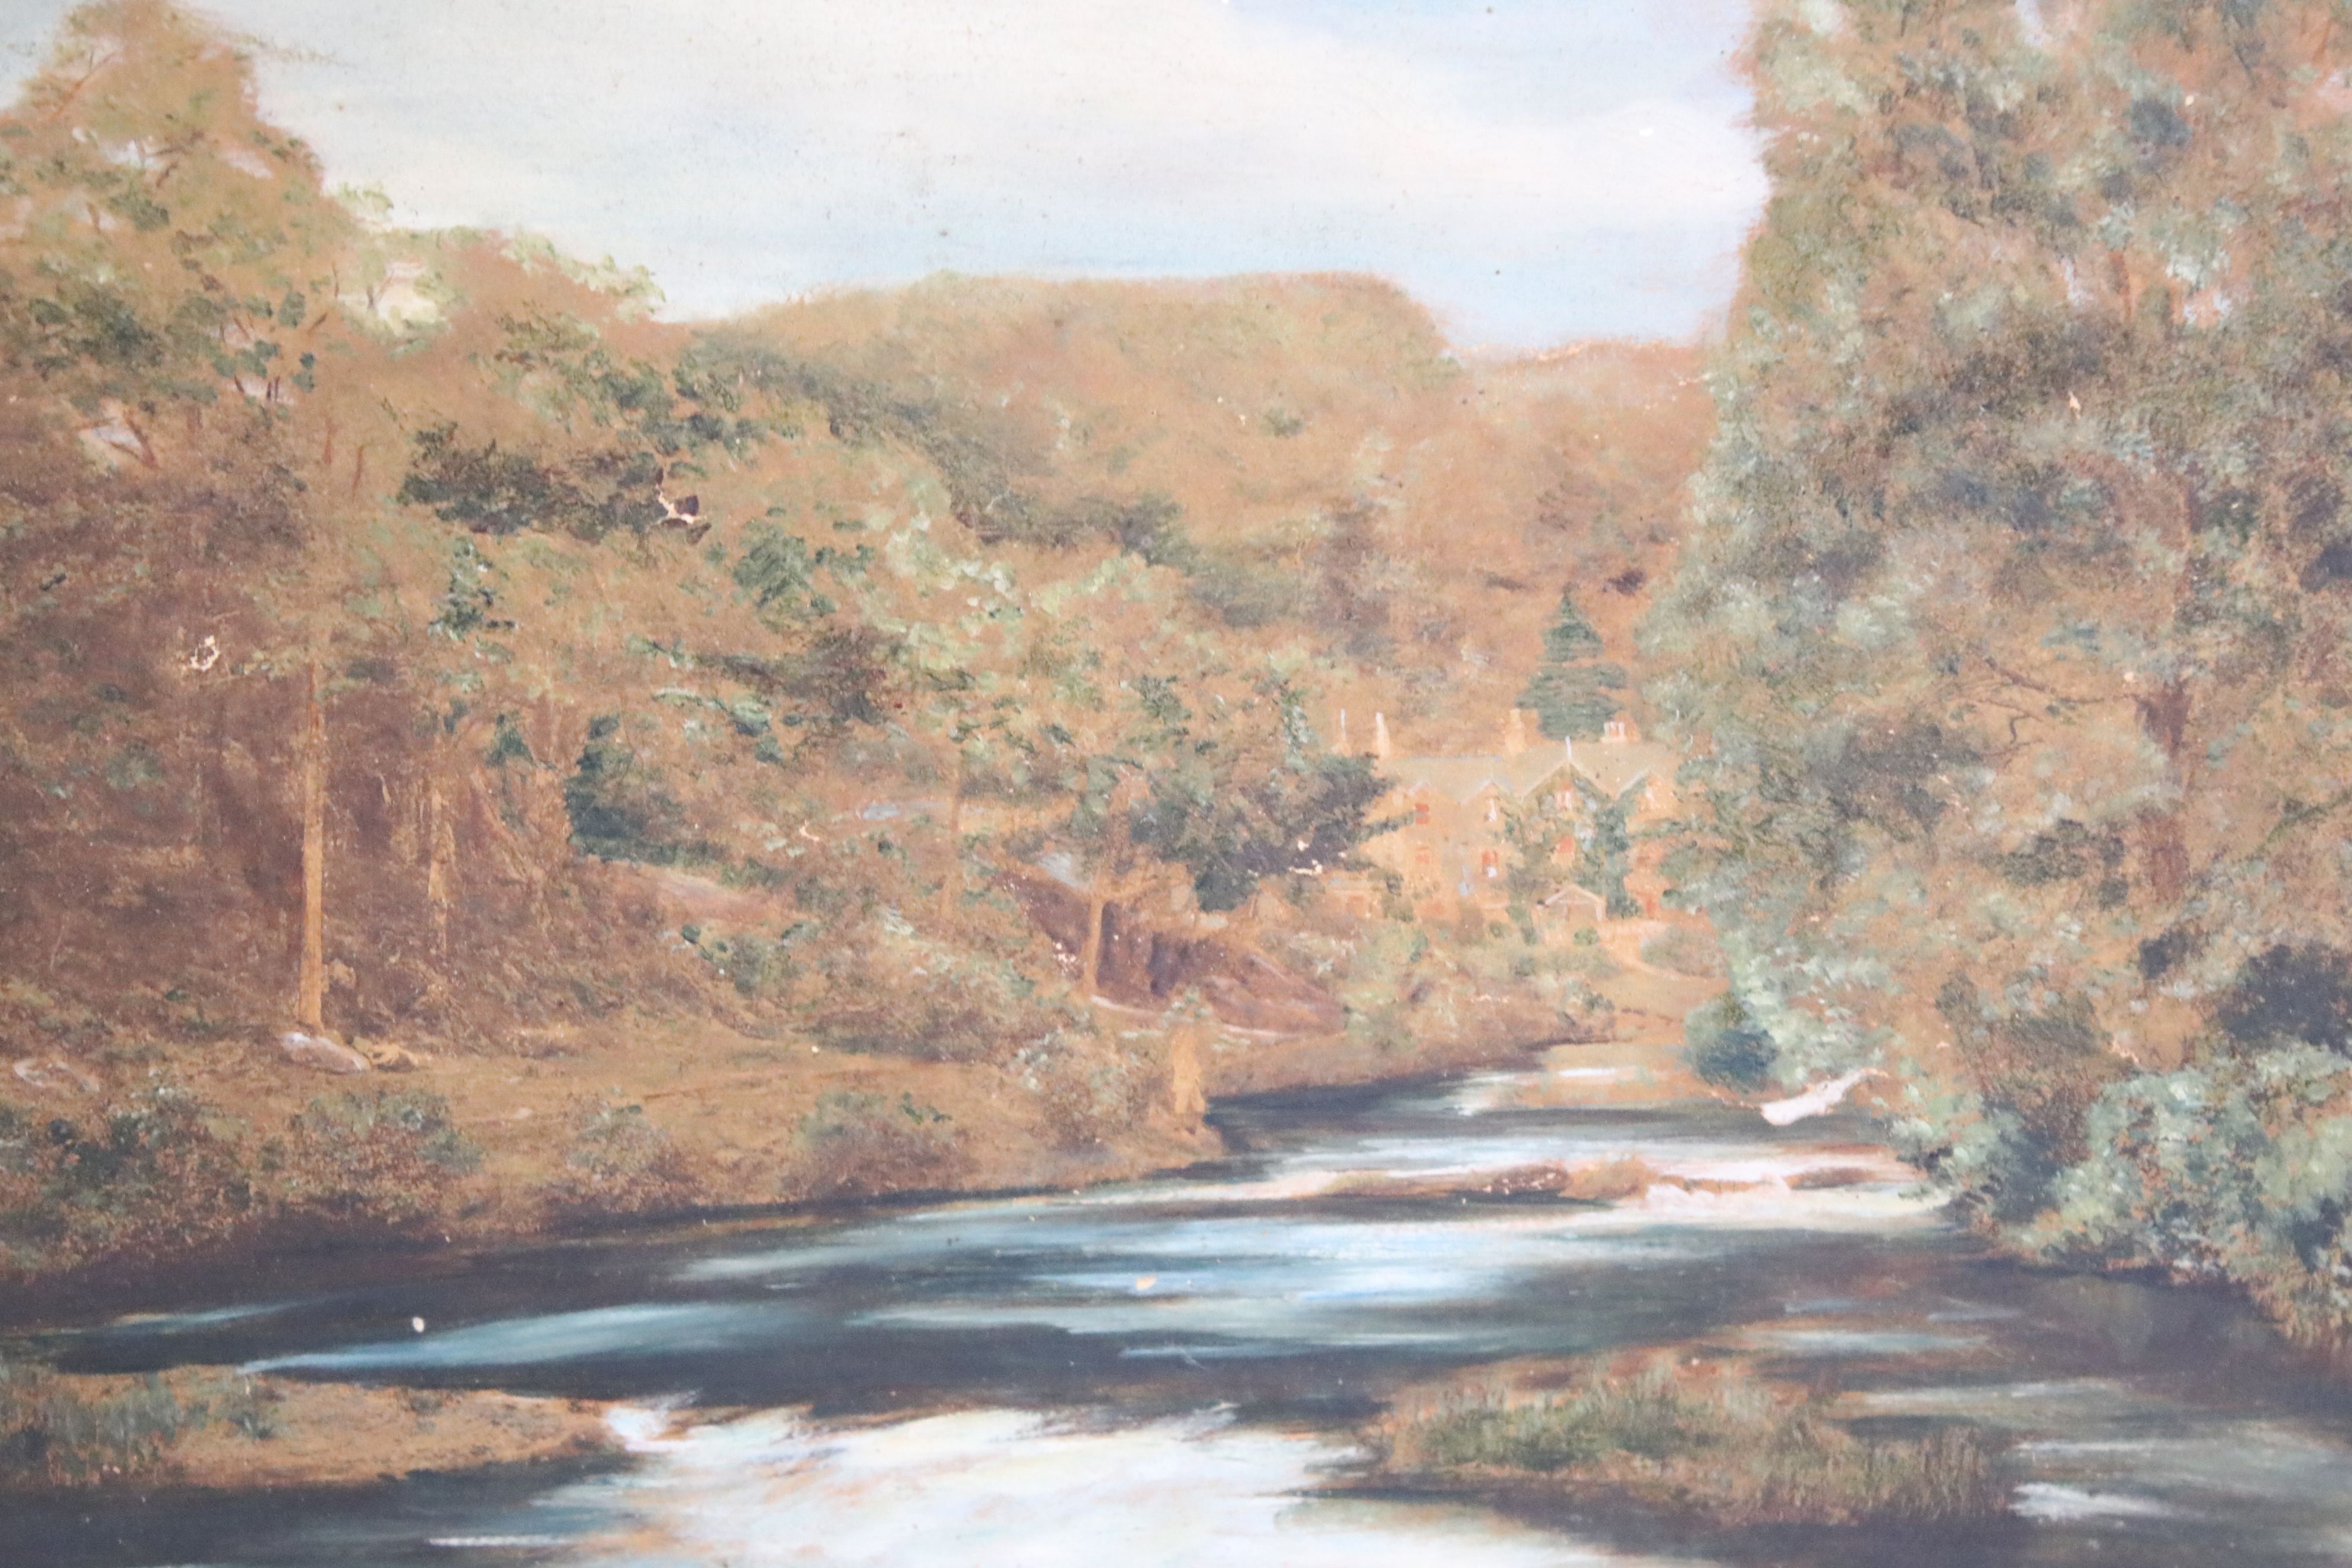 Late 19th / Early 20th century Oil on Canvas of Landscape River Scene, 19cm x 29cm, gilt framed - Image 2 of 6